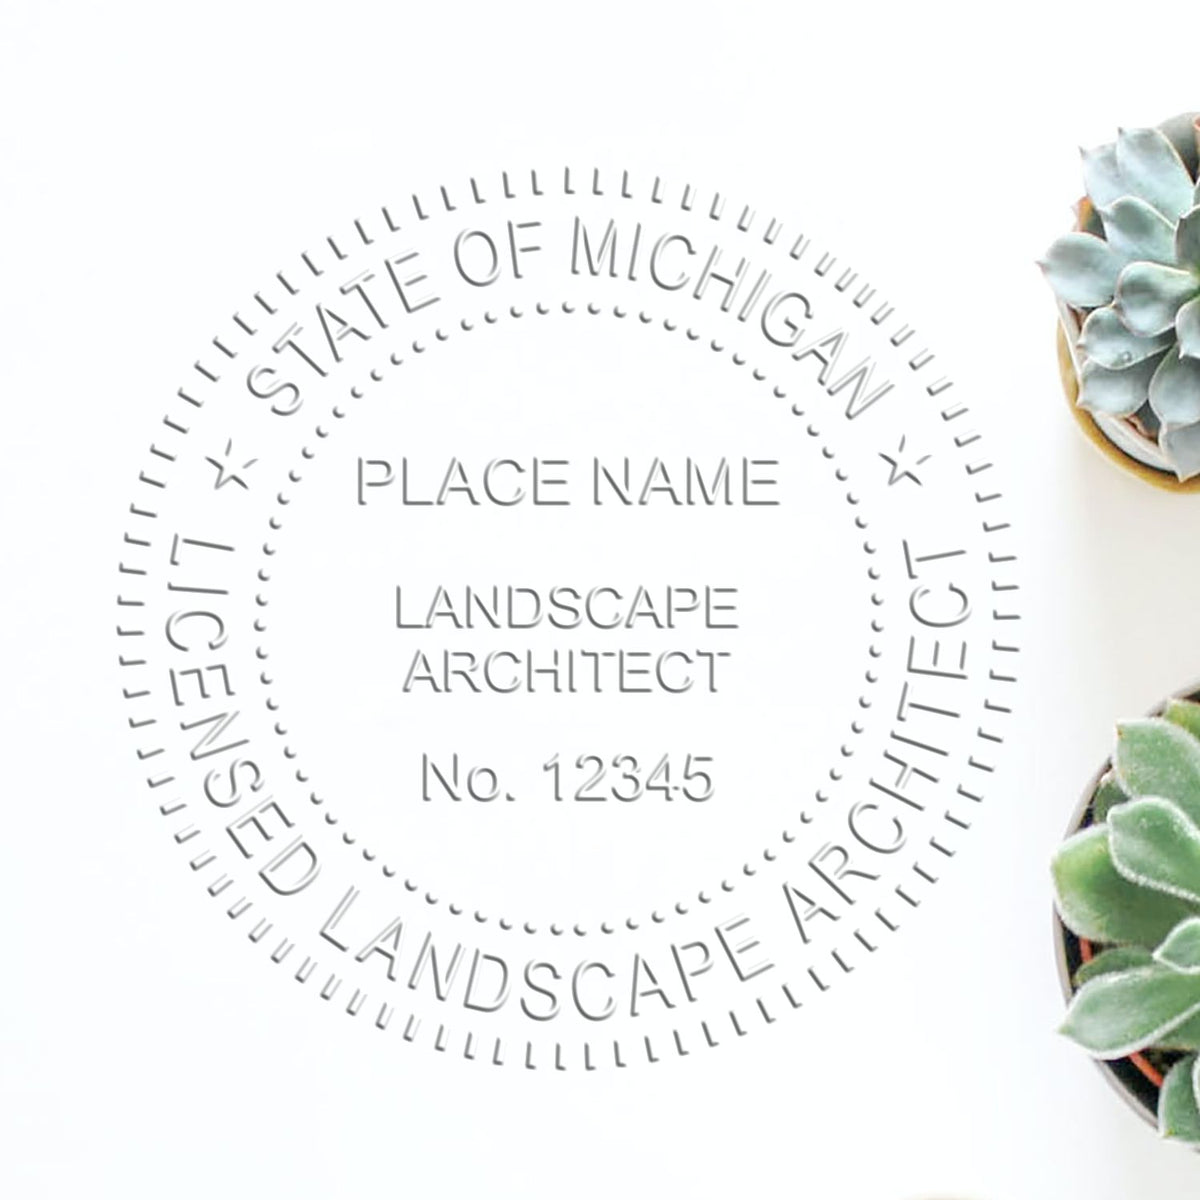 A stamped impression of the Soft Pocket Michigan Landscape Architect Embosser in this stylish lifestyle photo, setting the tone for a unique and personalized product.